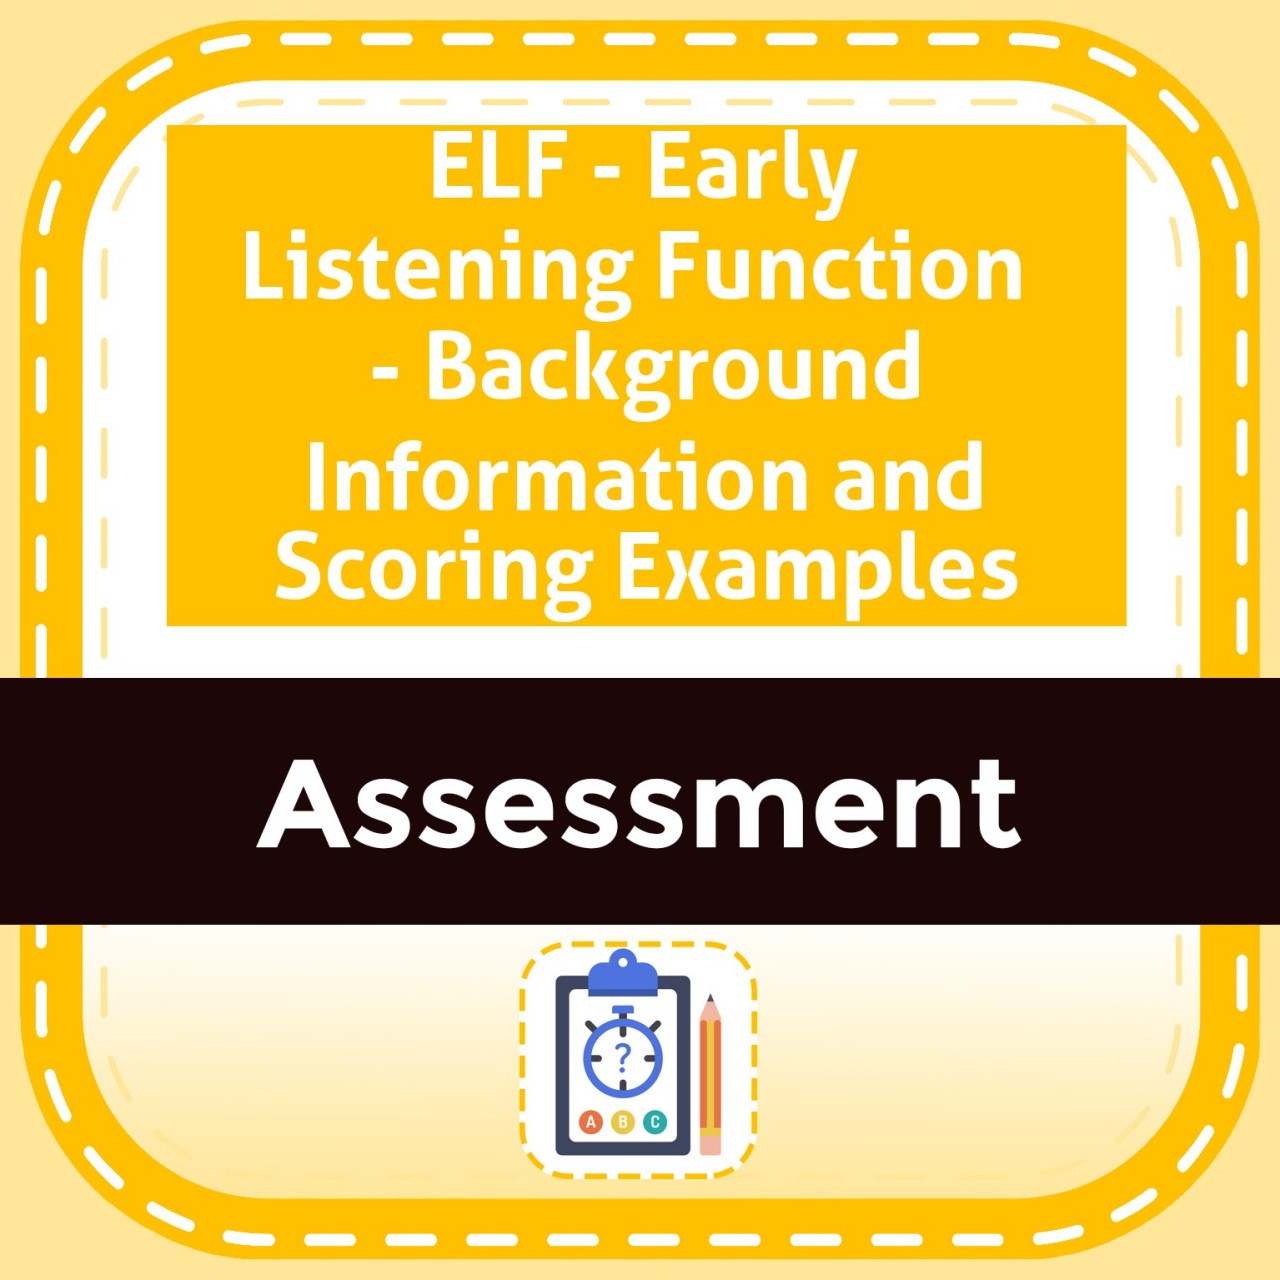 ELF - Early Listening Function  - Background Information and Scoring Examples